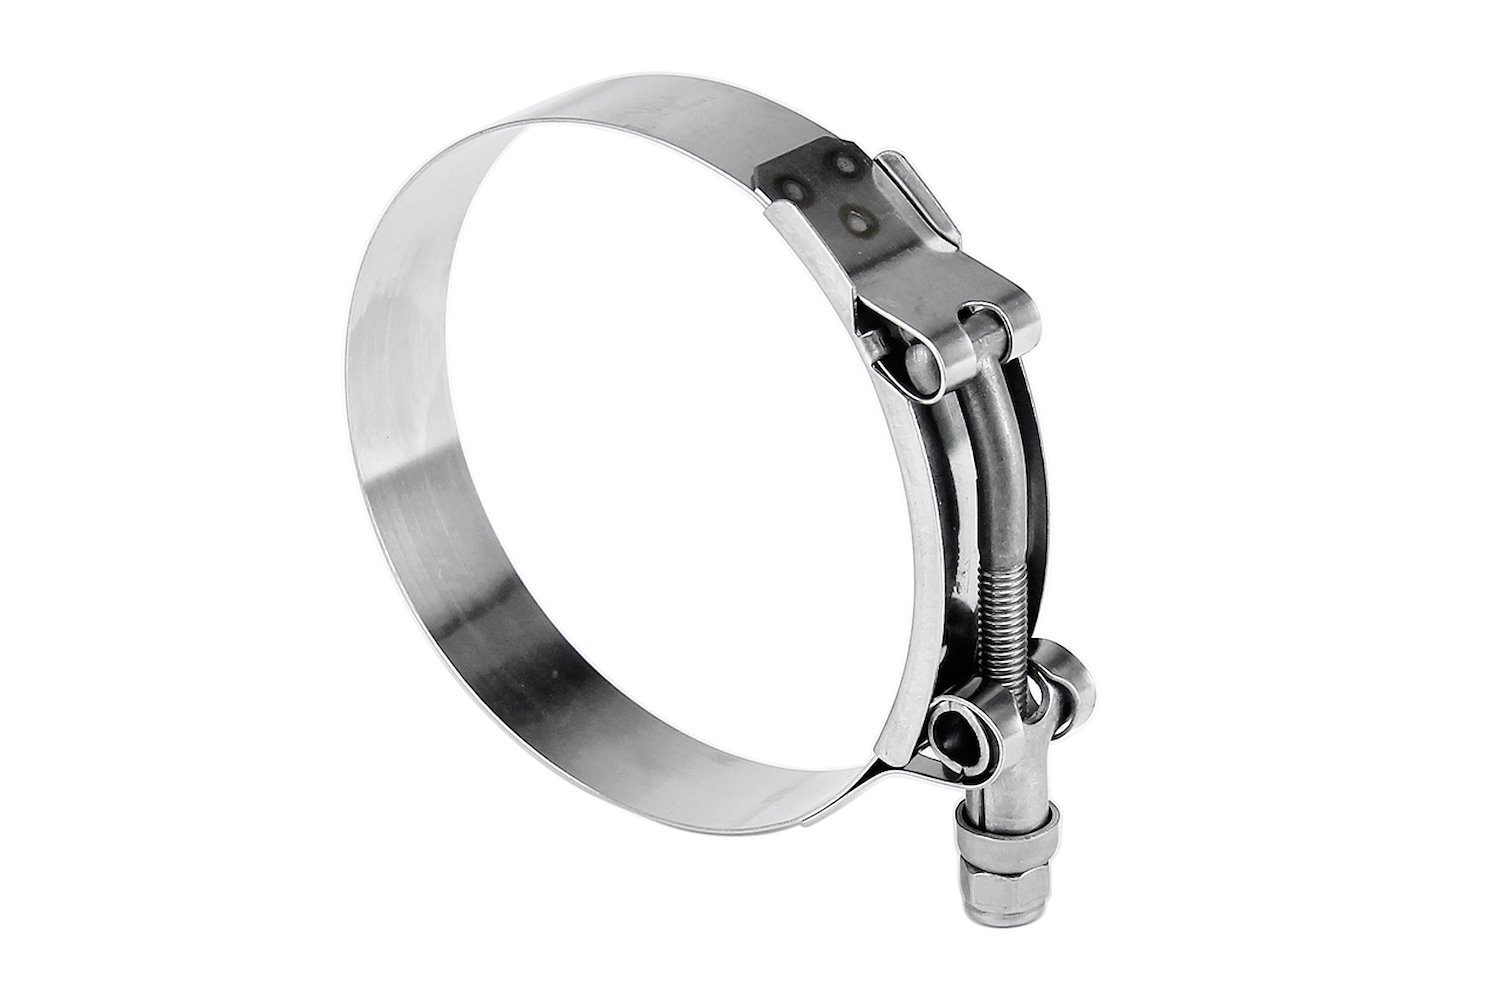 316-SSTC-89-97 100-Percent Marine Grade Stainless Steel T-Bolt Hose Clamp, Size #84, Range: 3.5 in.- 3.82 in.